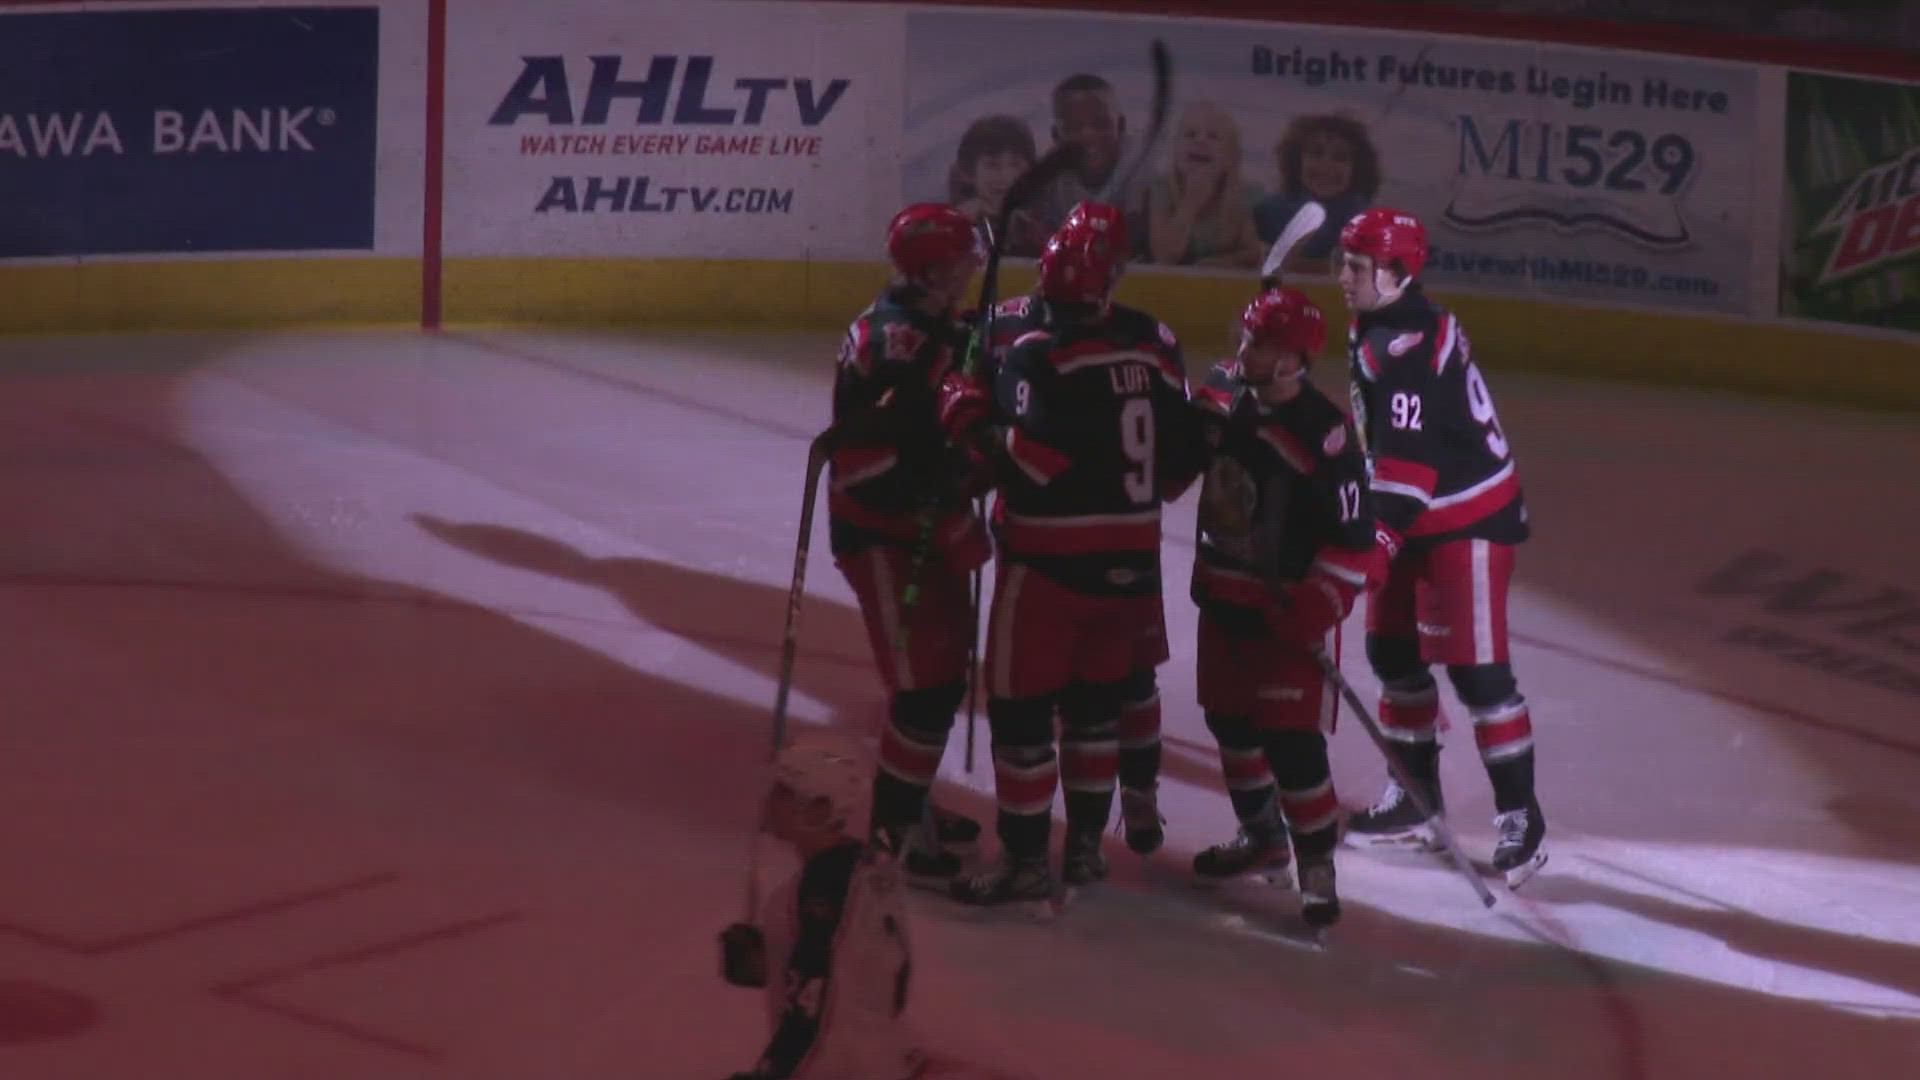 Griffins clinch first playoff berth in five seasons with 5-2 win over Monsters.